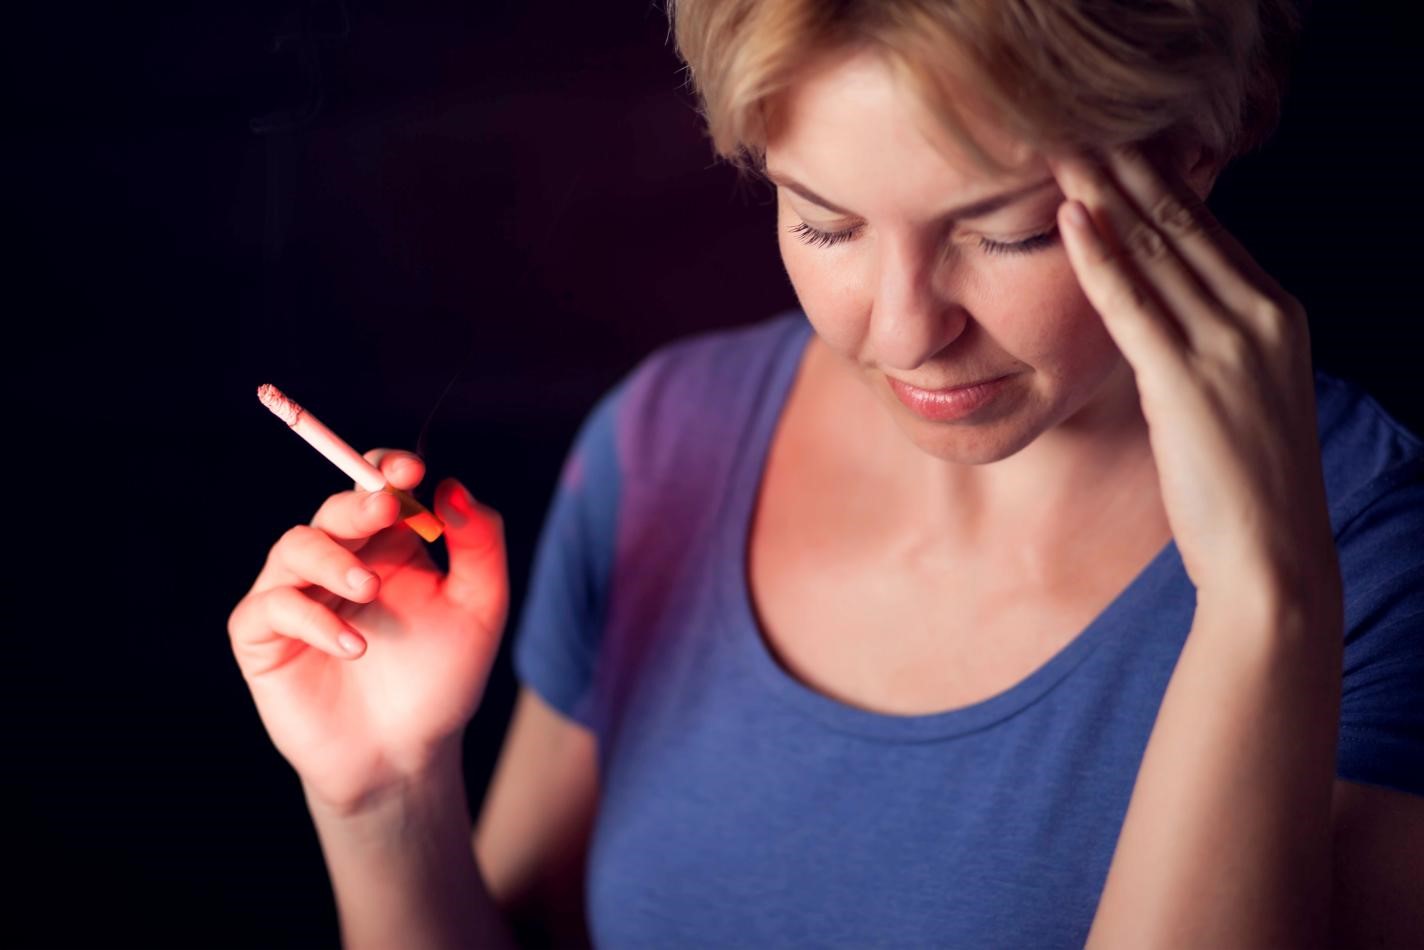 How To Deal With A Nicotine Headache When Quitting Smoking